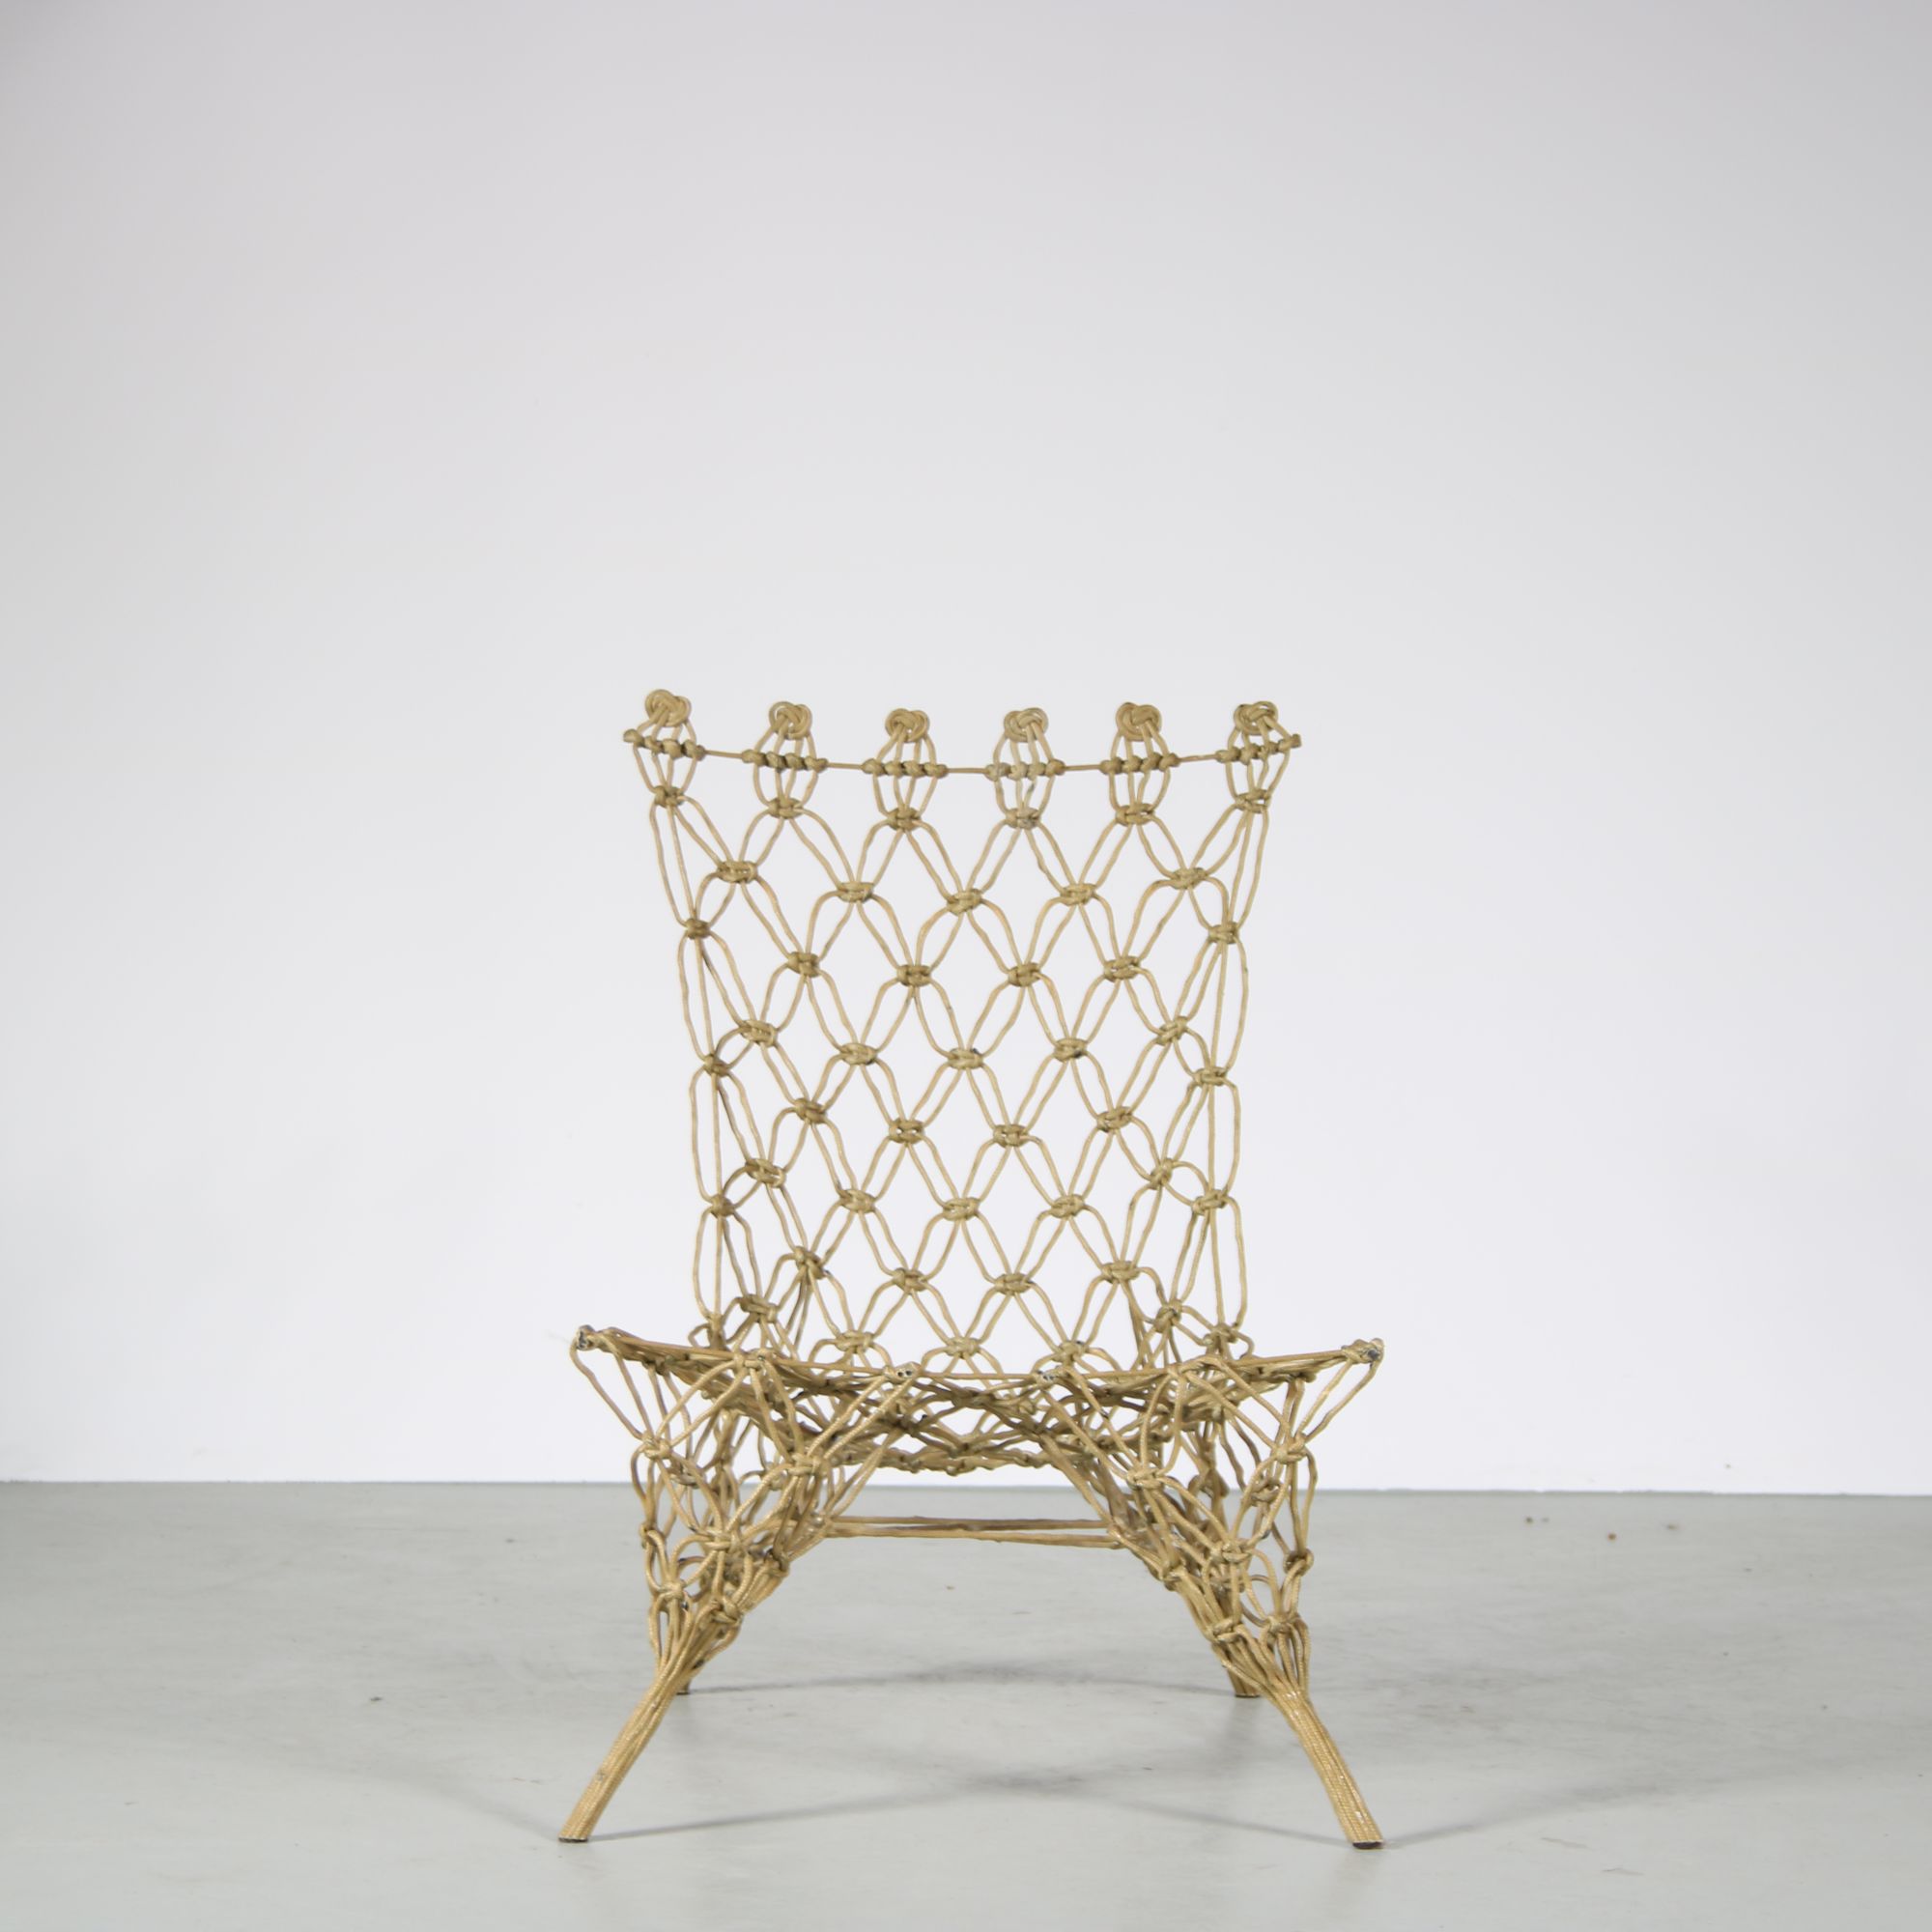 Marcel Wanders, Droog Design, Cappellini Knotted Chair, 1996, Netherlands,  Italy